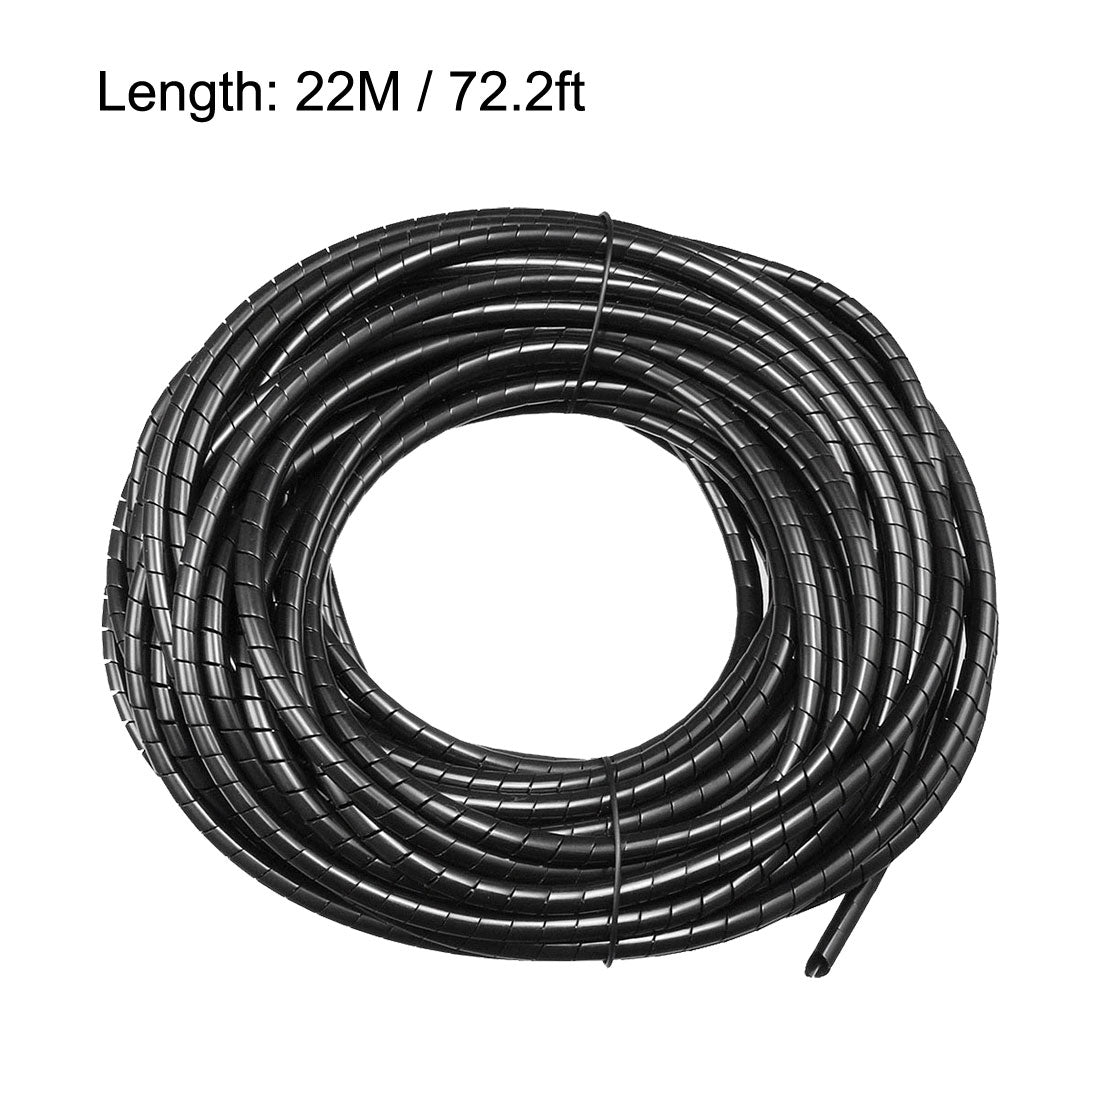 uxcell Uxcell 2.8mm Flexible Spiral Tube Cable Wire Wrap Manage Cord 22M Length Black